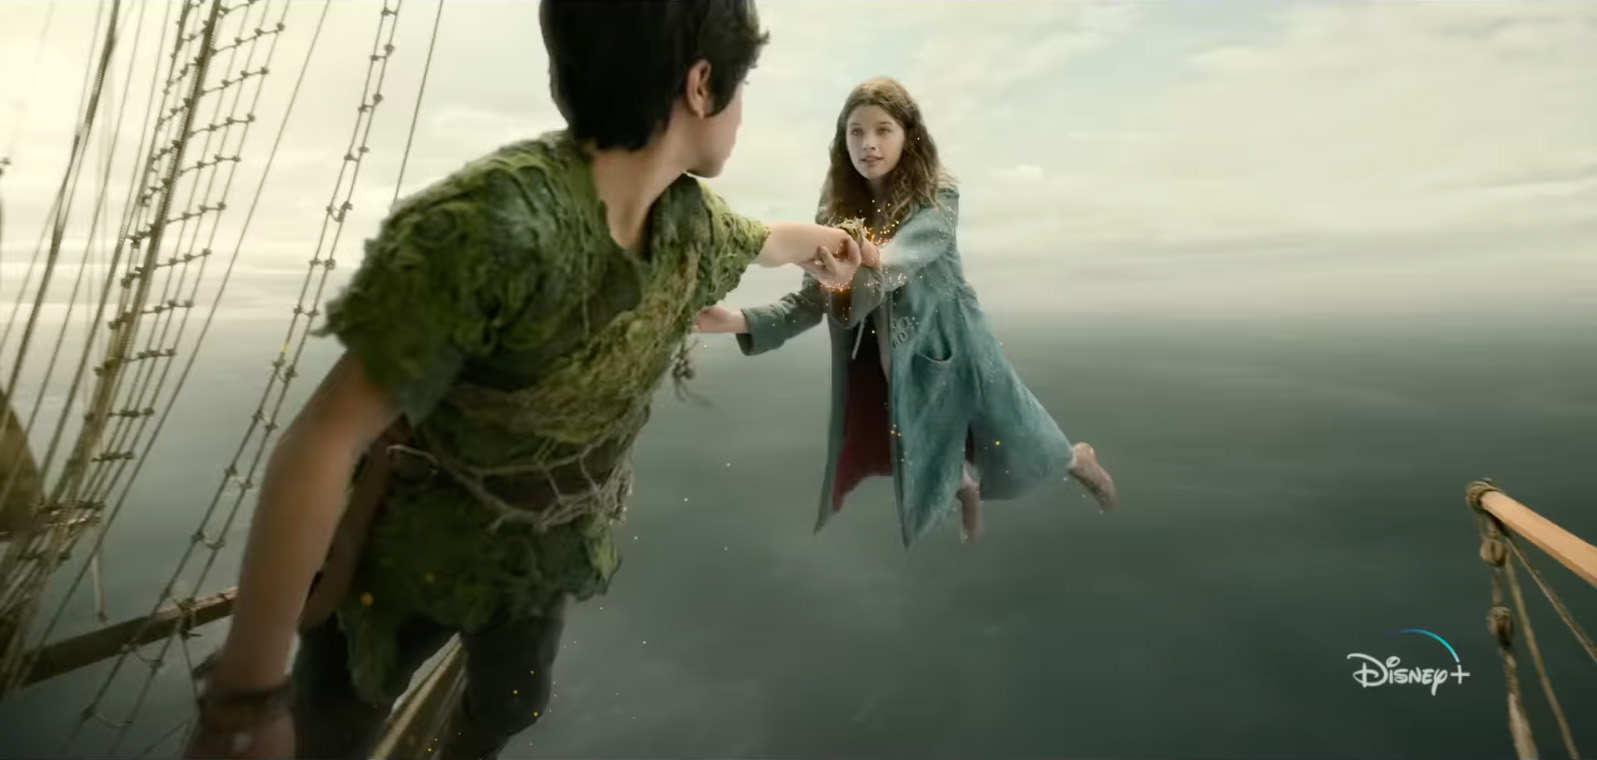 PHOTO: Alexander Molony and Ever Anderson as Peter Pan and Wendy, respectively, in a screen grab from the official trailer of "Peter Pan & Wendy."